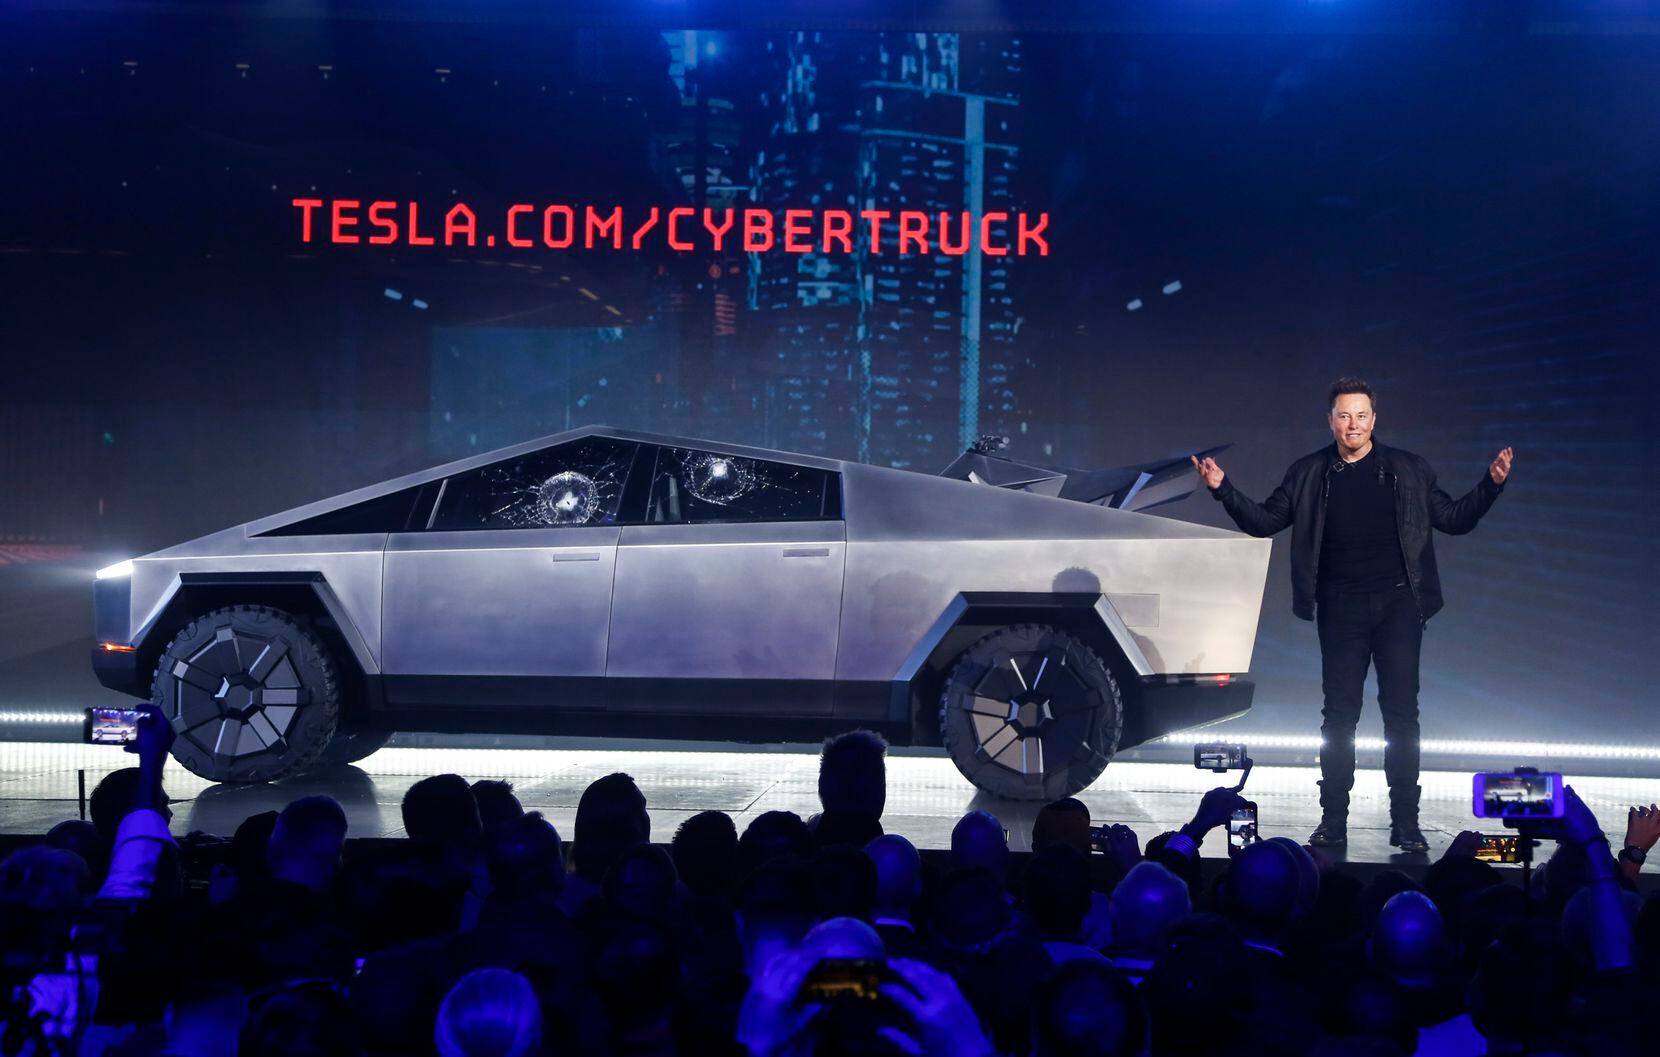 Tesla CEO Elon Musk is taking on the workhorse heavy pickup truck market with his latest electric vehicle.
